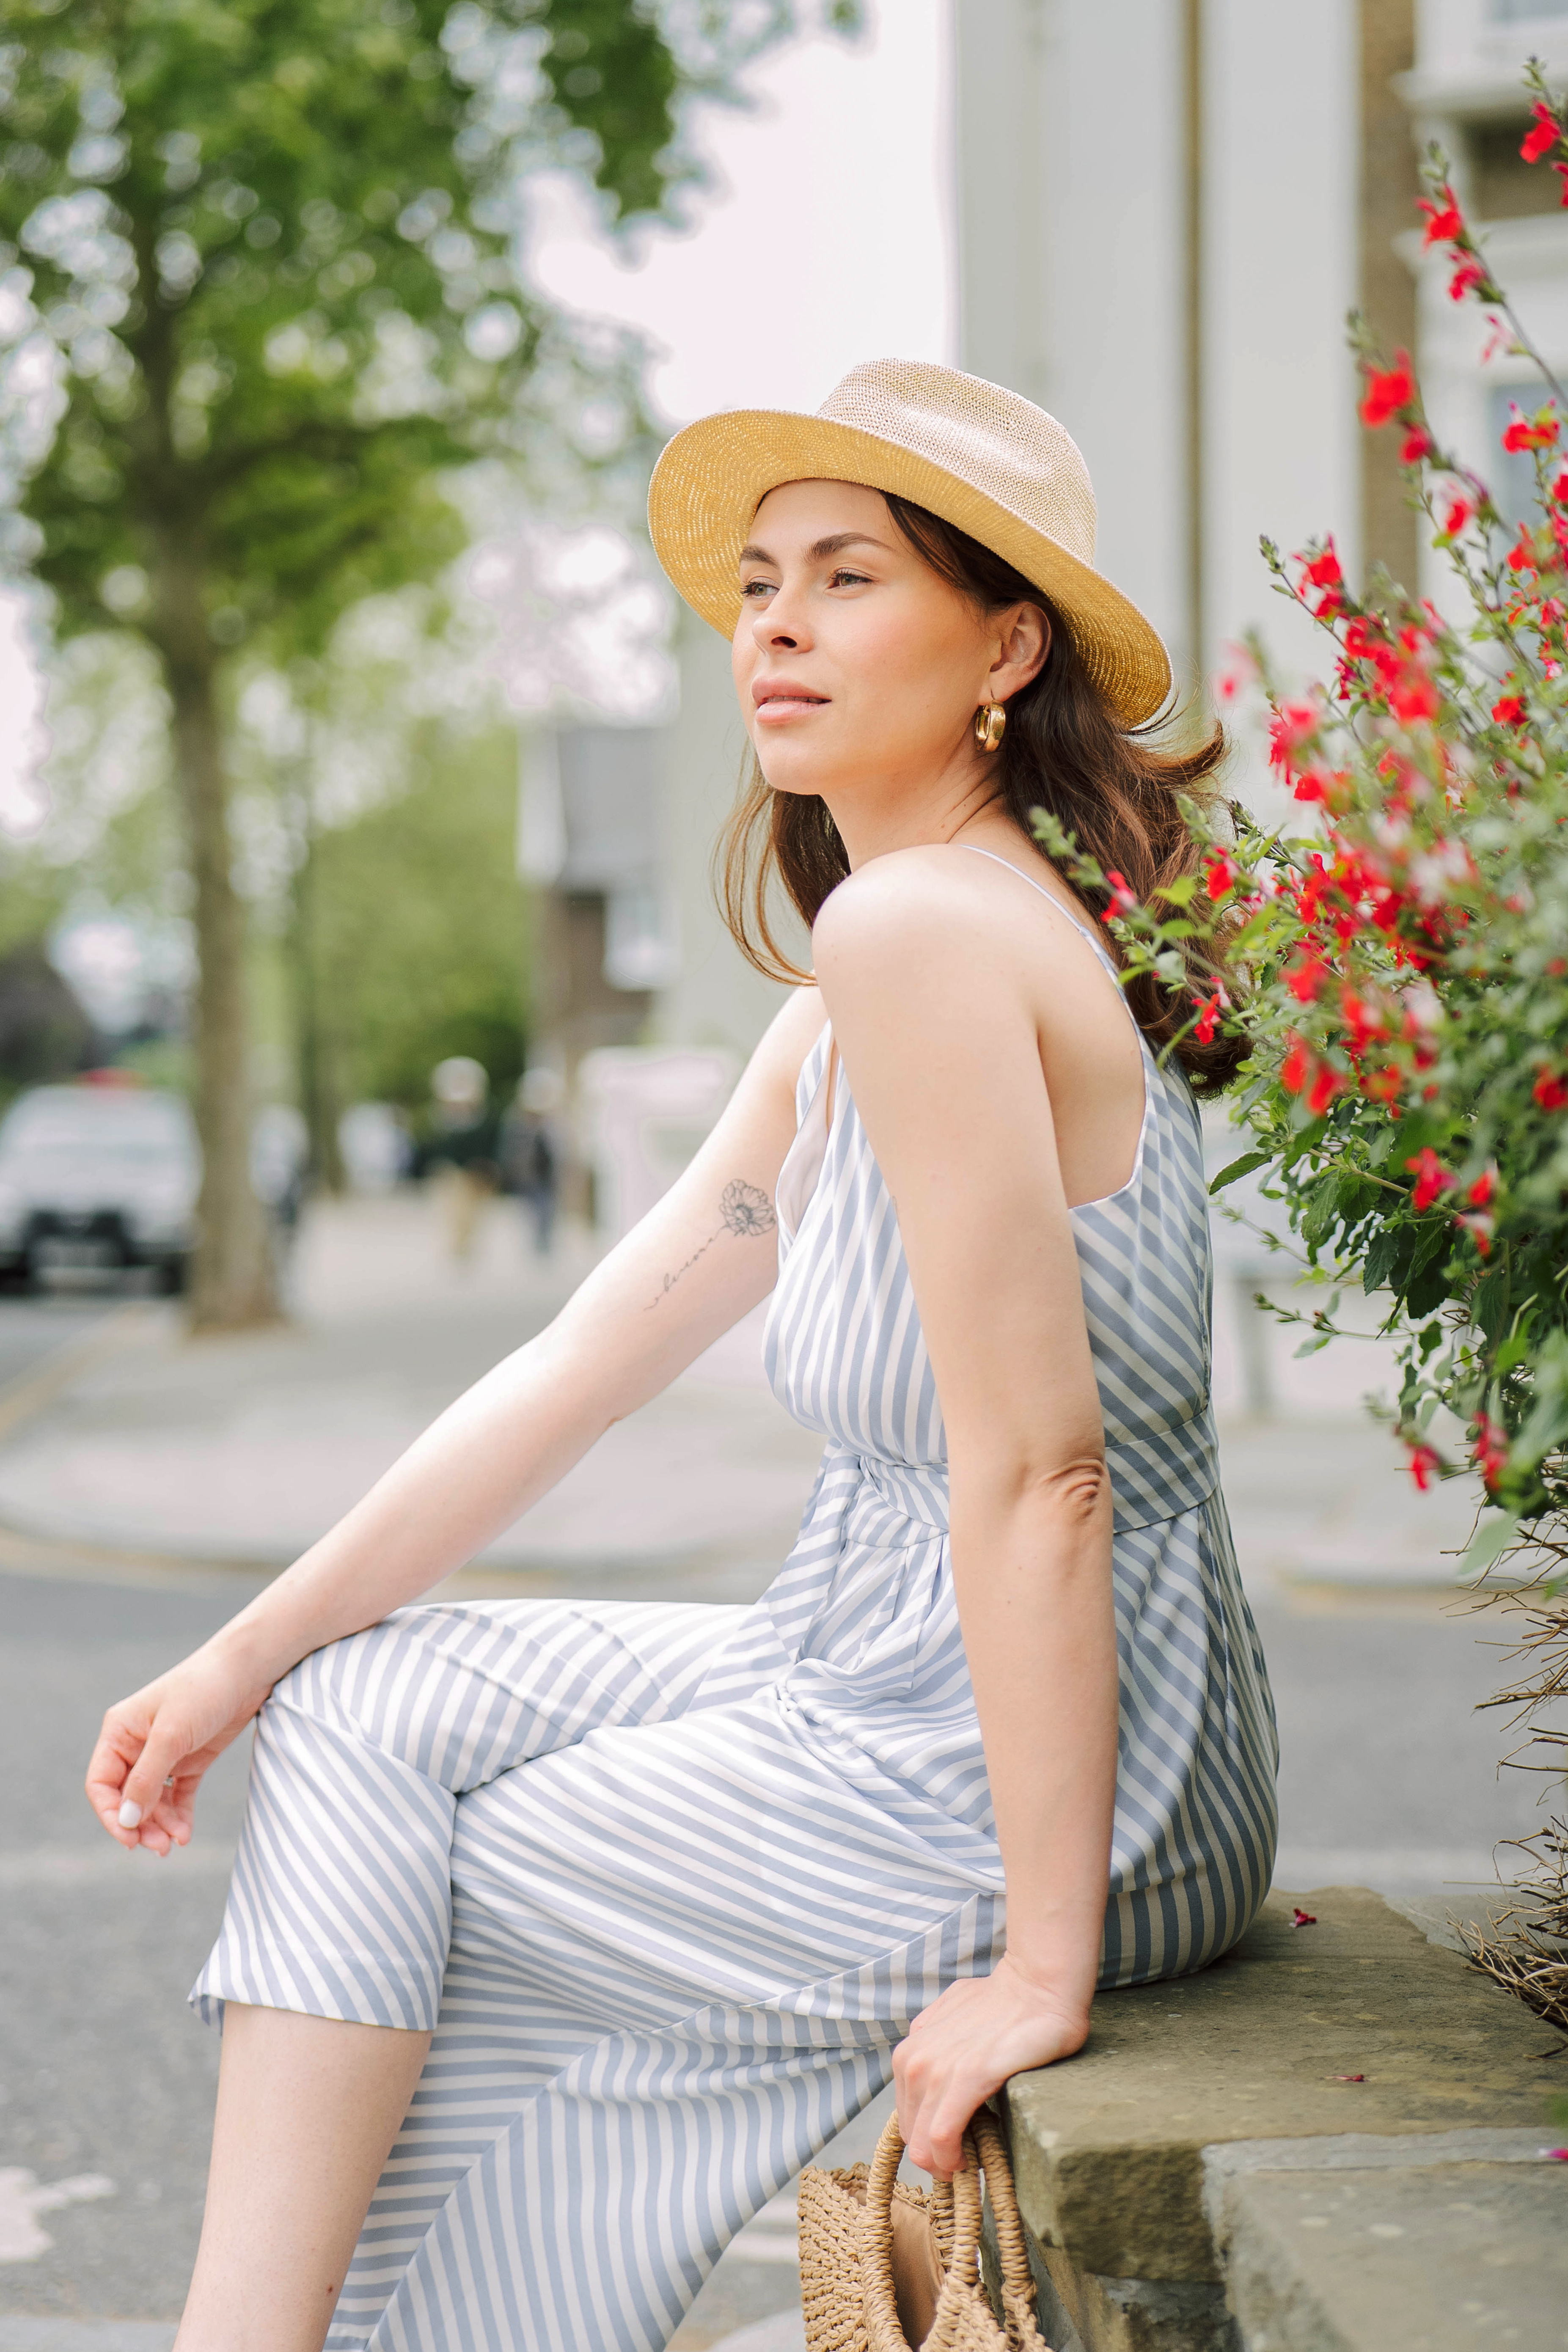 Summer photoshoot of a woman in hat